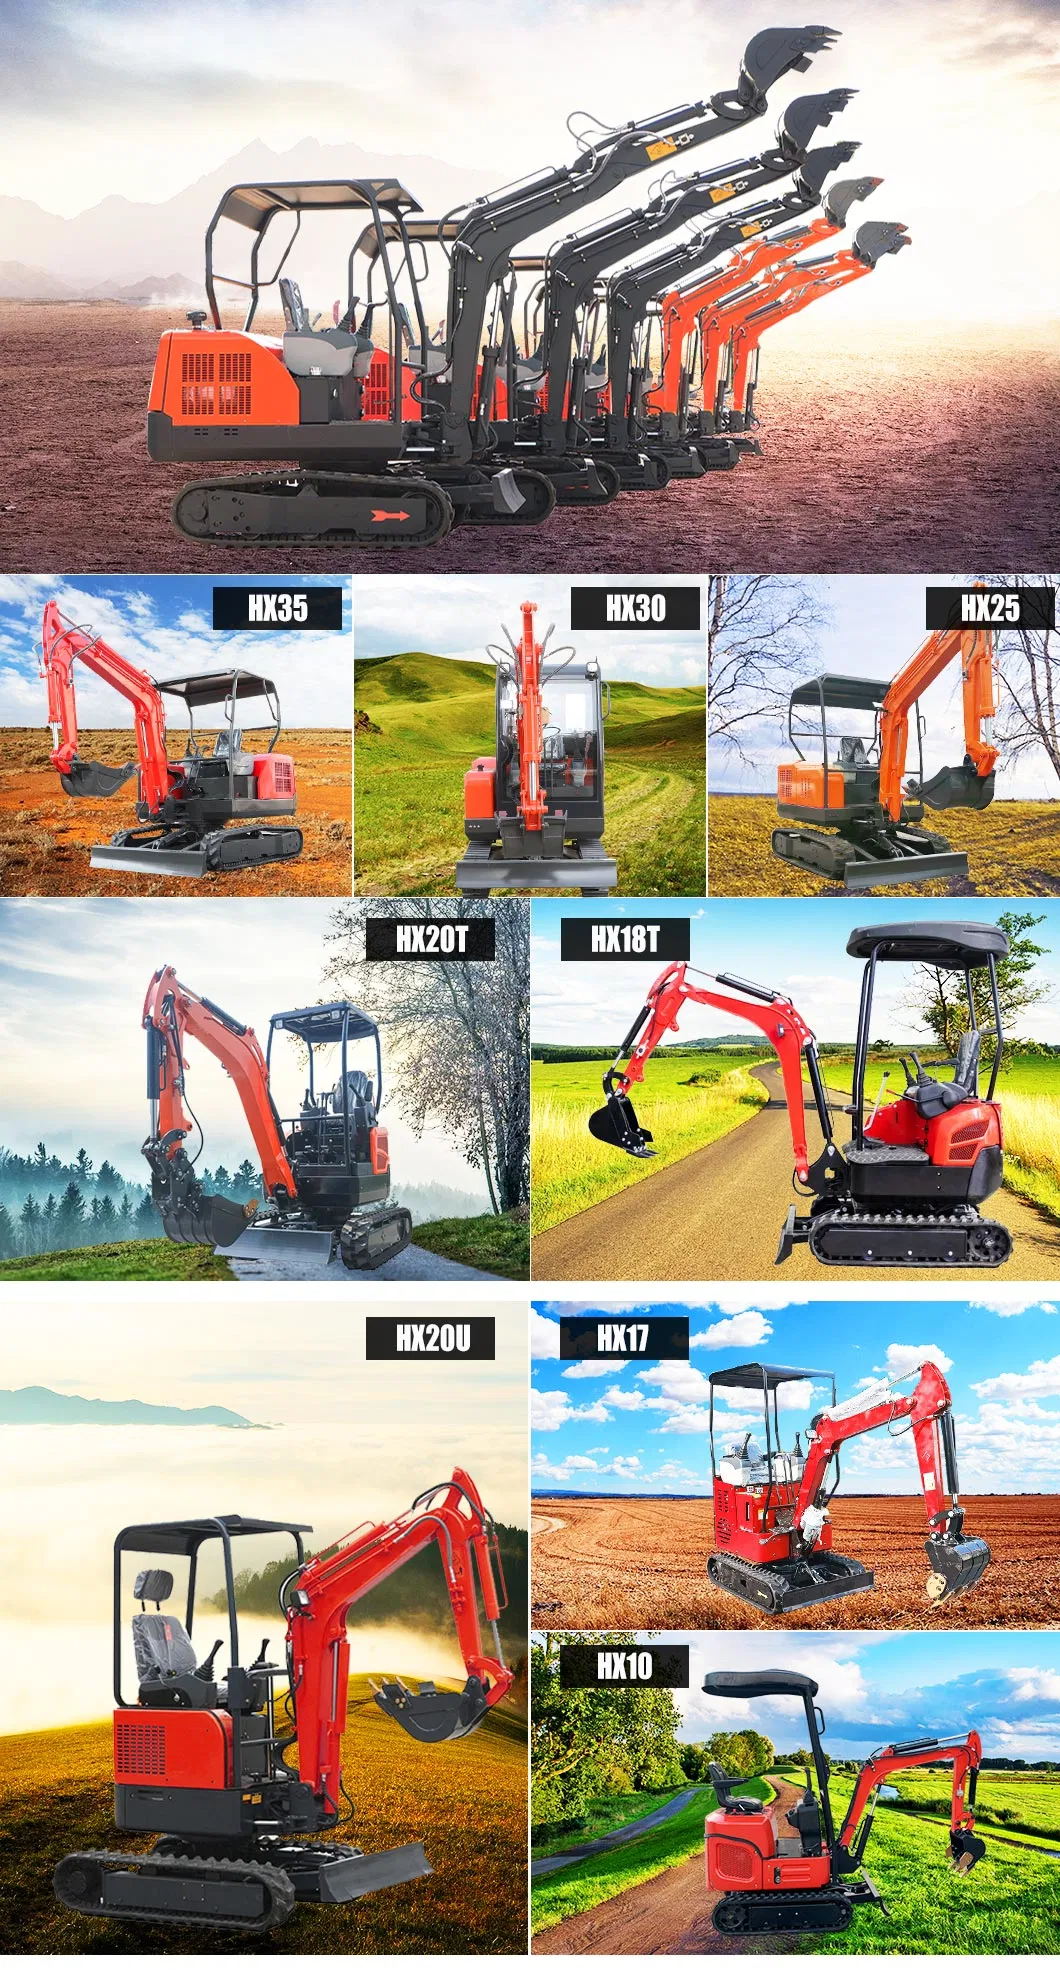 Cheap 2 Ton 3 T Mini Excavator Price CE Approved Excavator Machine Mini Digger for Sale Small Construction Machinery Agricultural Excavator Mini